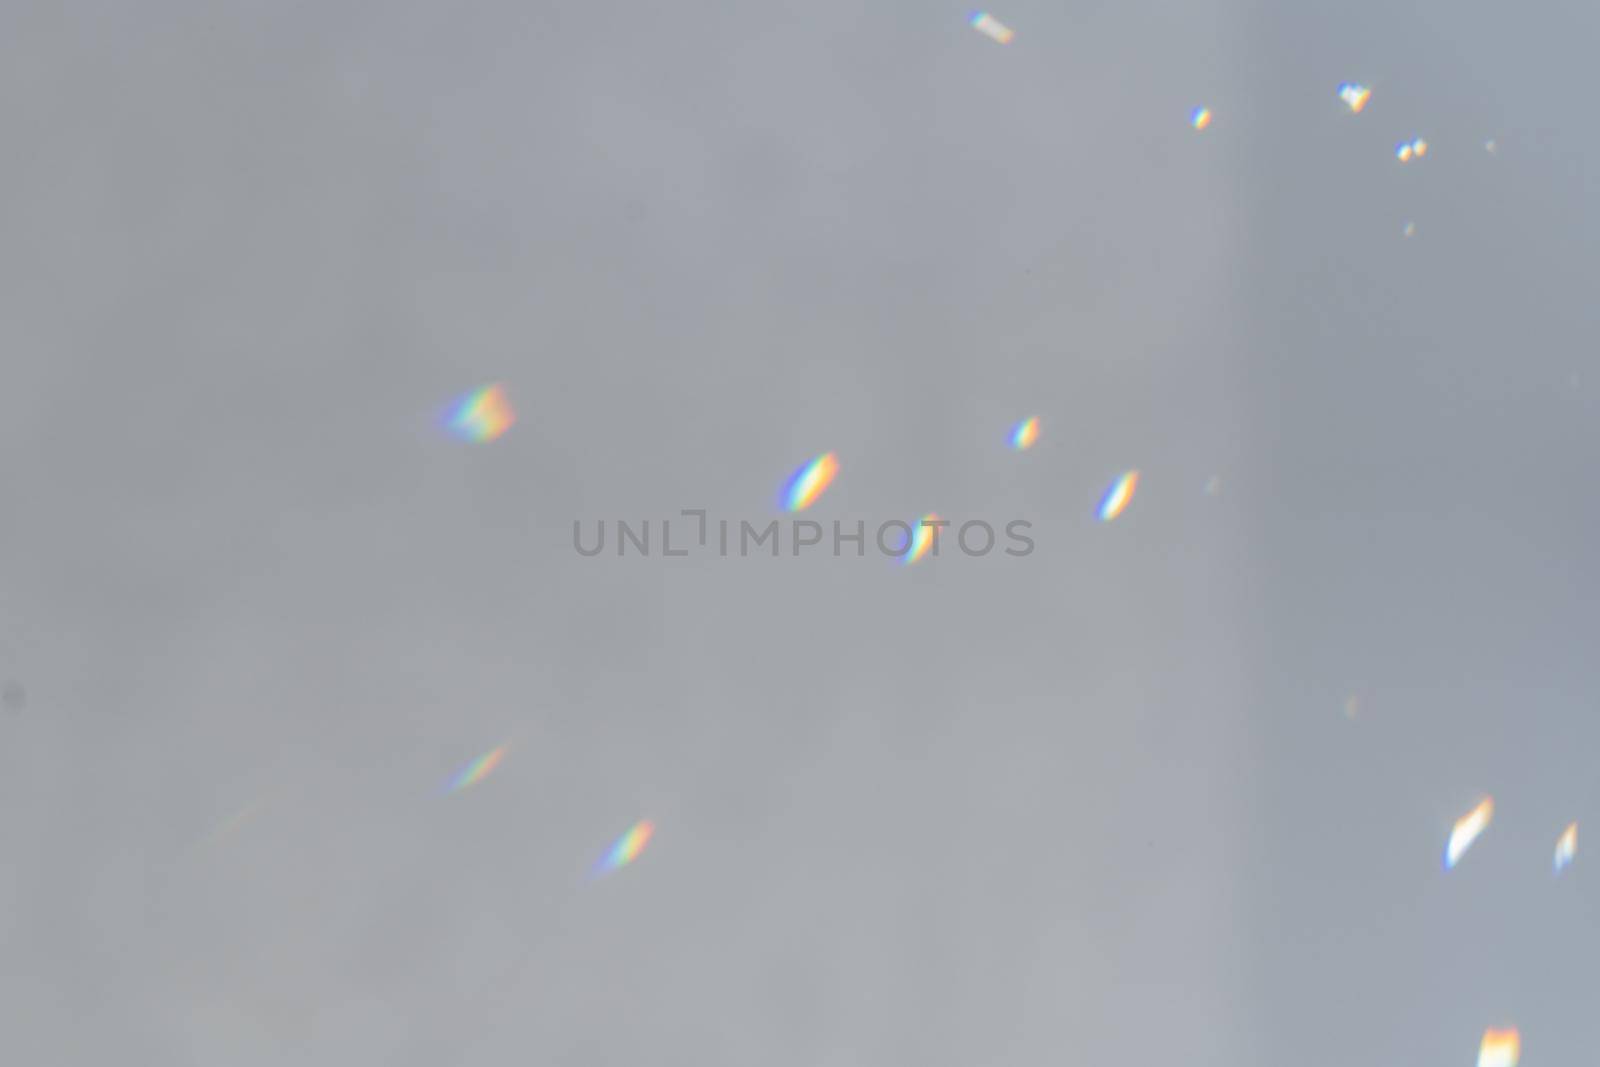 .Rainbow holographic shadow mock up, iridescent prismatic wallpaper. Abstract prism reflection, rays leaking through lens effect. Crystal light reflections for overlay mockup on light. by photolime